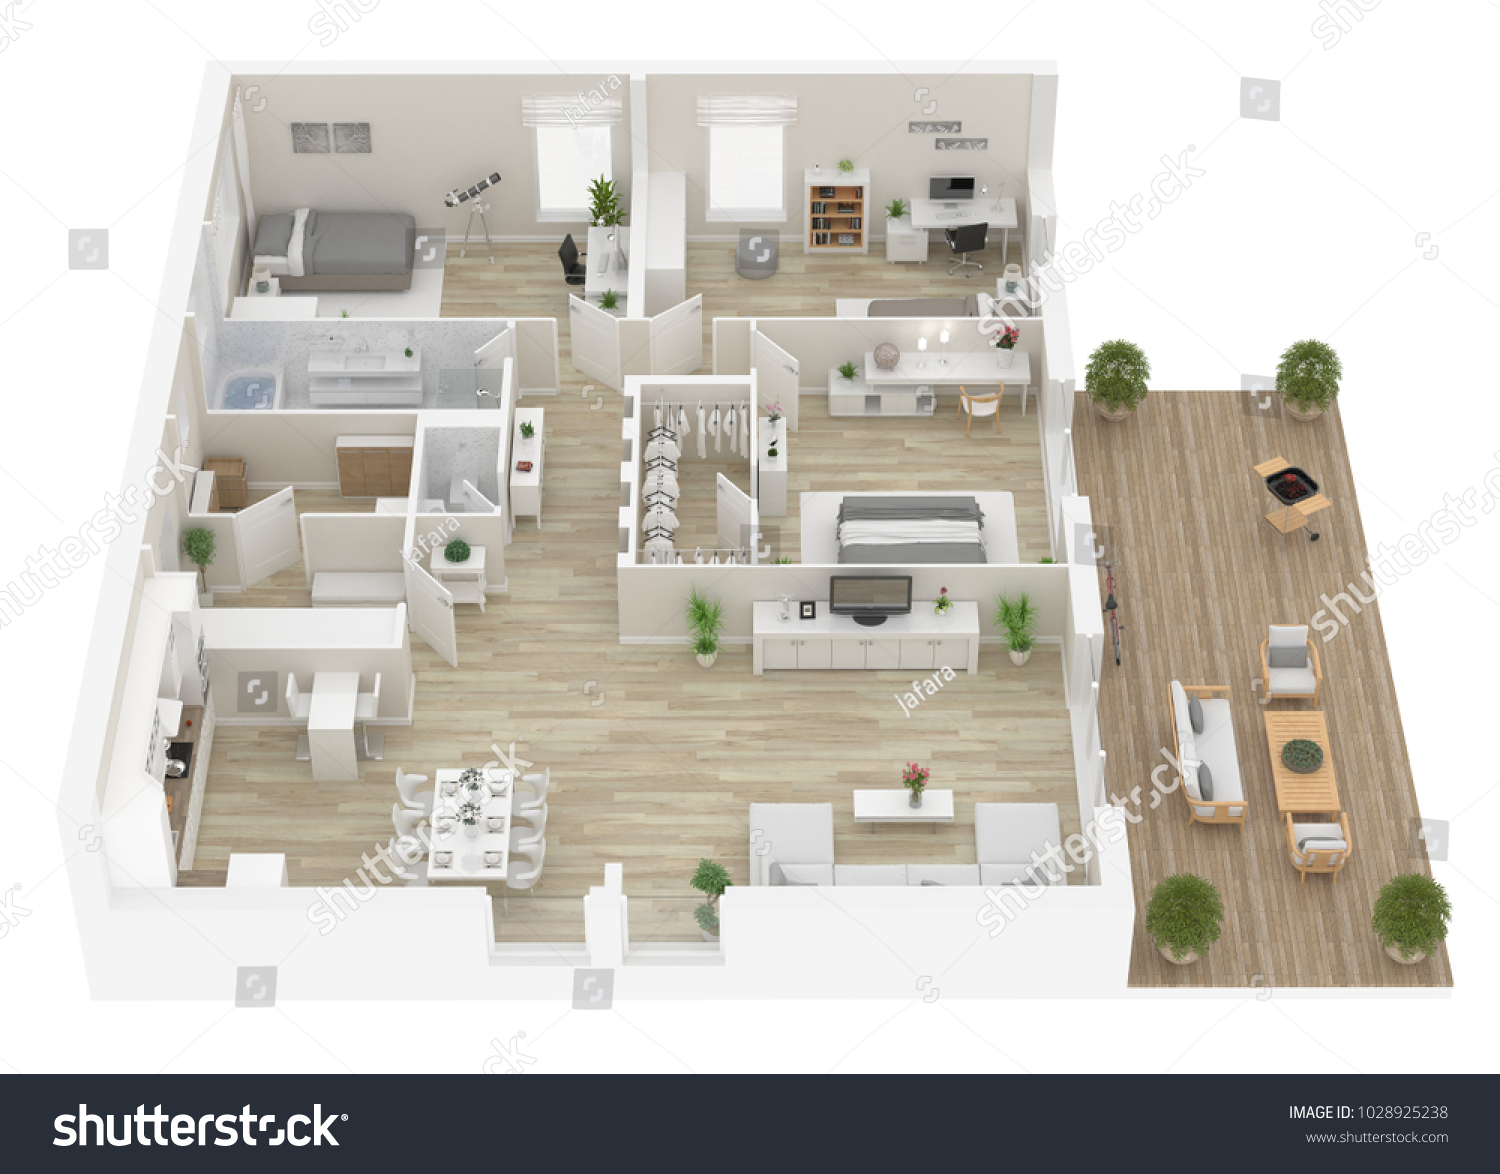 stock-photo-floor-plan-top-view-apartment-interior-isolated-on-white-background-d-render-1028925238